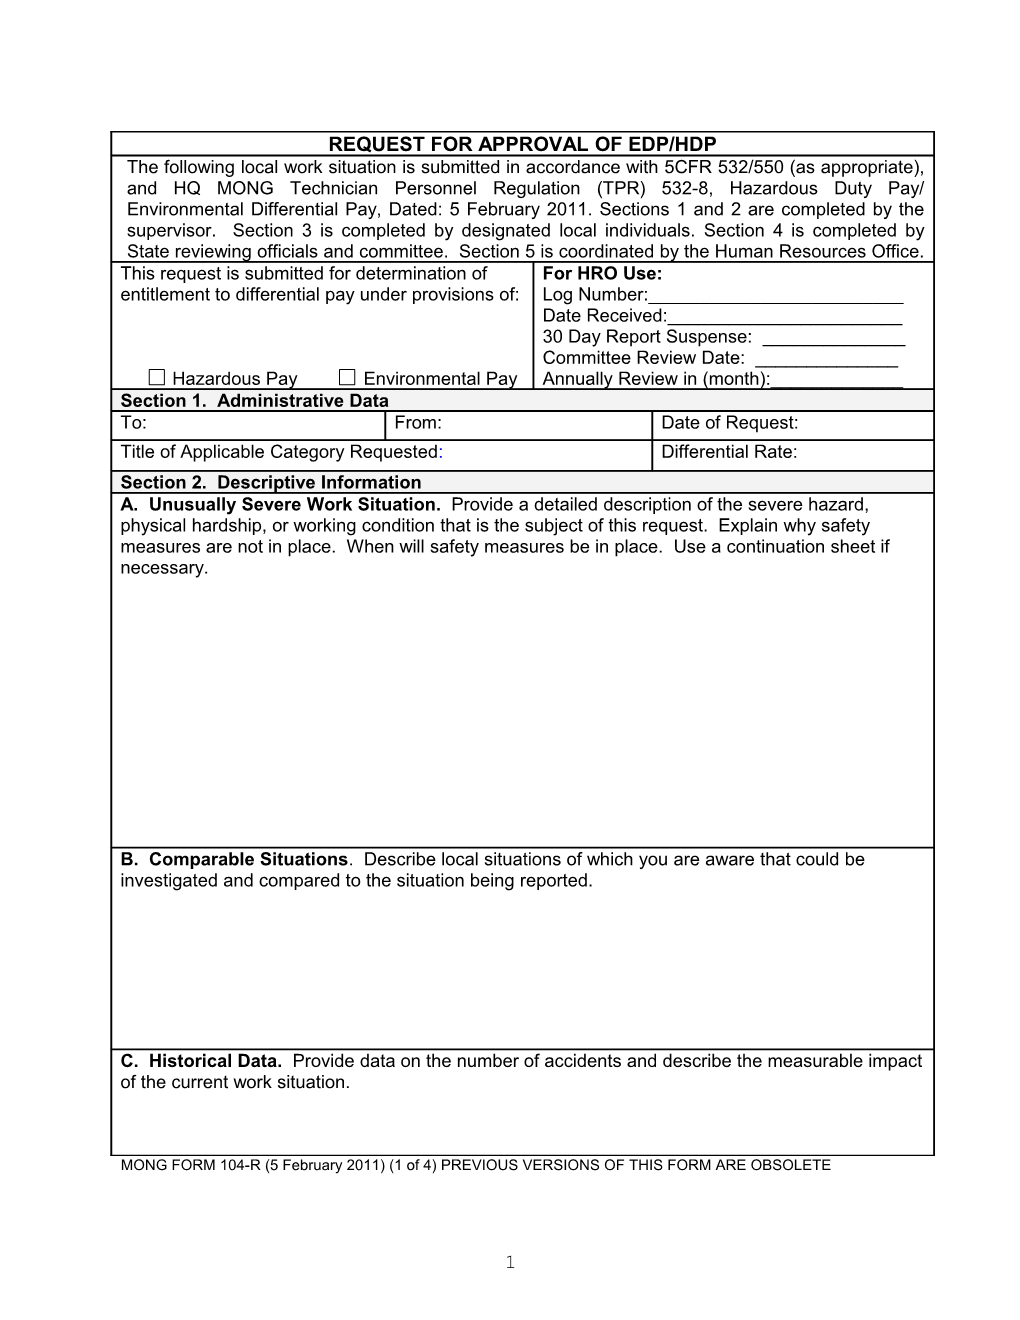 MONG FORM 104-R (5 February 2011) (1 of 4) PREVIOUS VERSIONS of THIS FORM ARE OBSOLETE